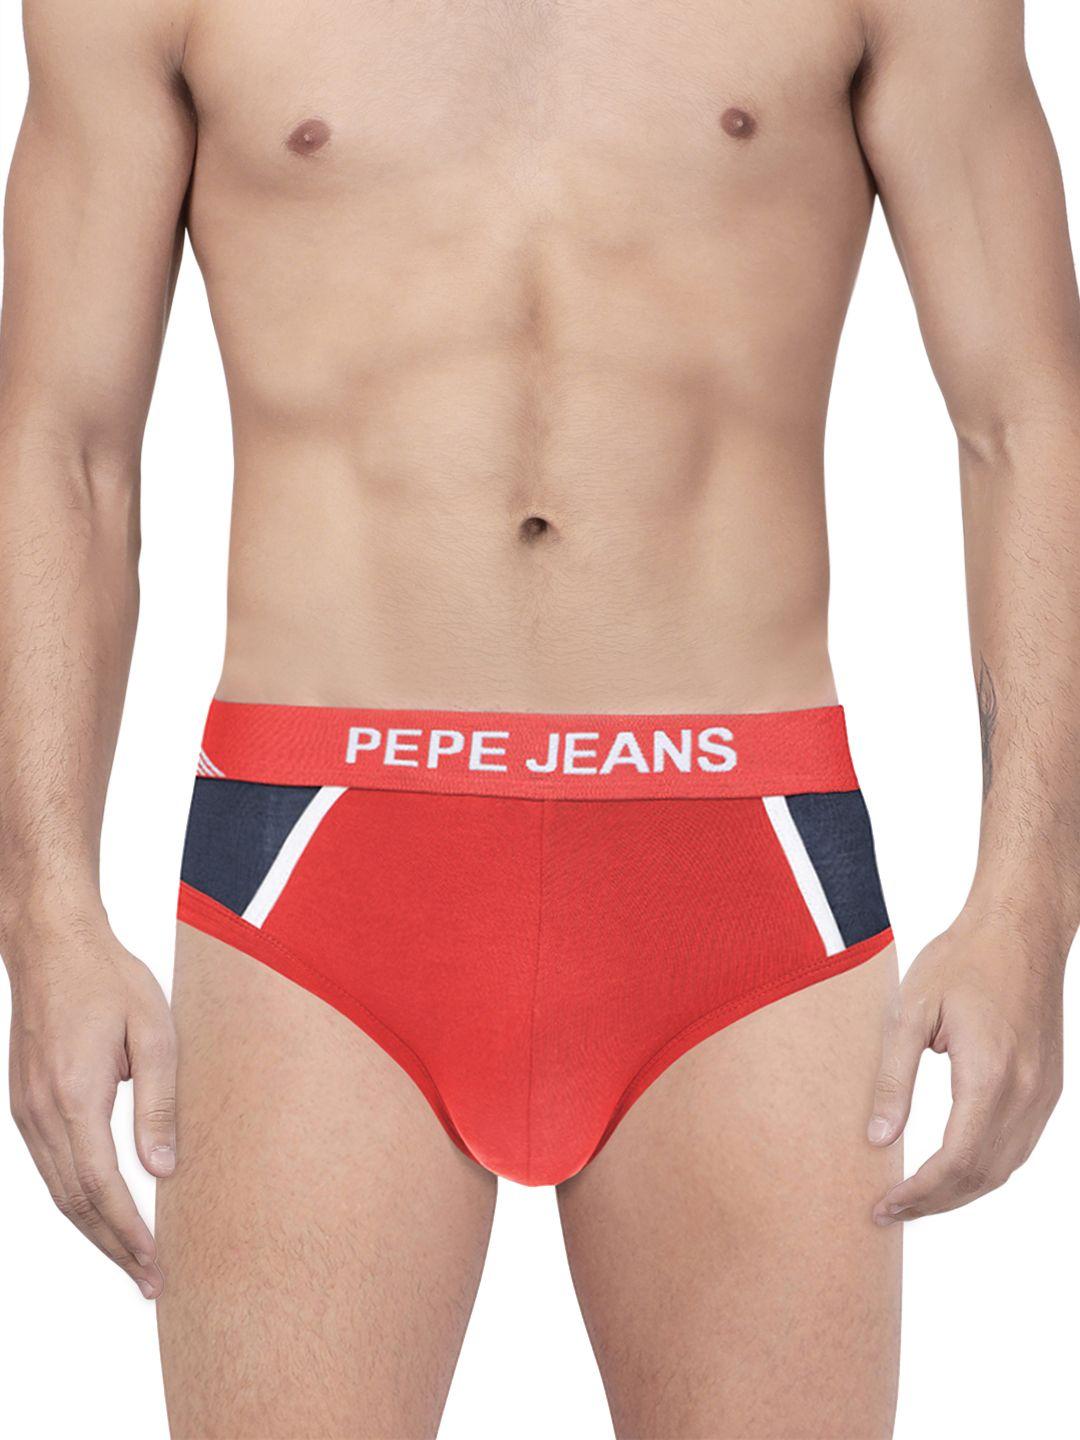 pepe-jeans-men-red-&-navy-blue-colourblocked-briefs-8904311303831